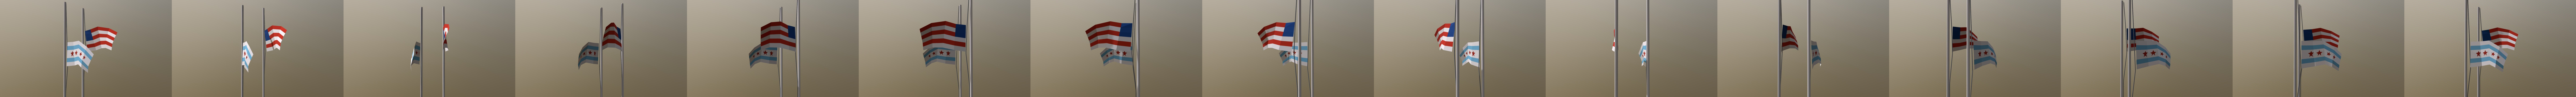 3D model 20 COUNTRY FLAG PATCHES VR / AR / low-poly